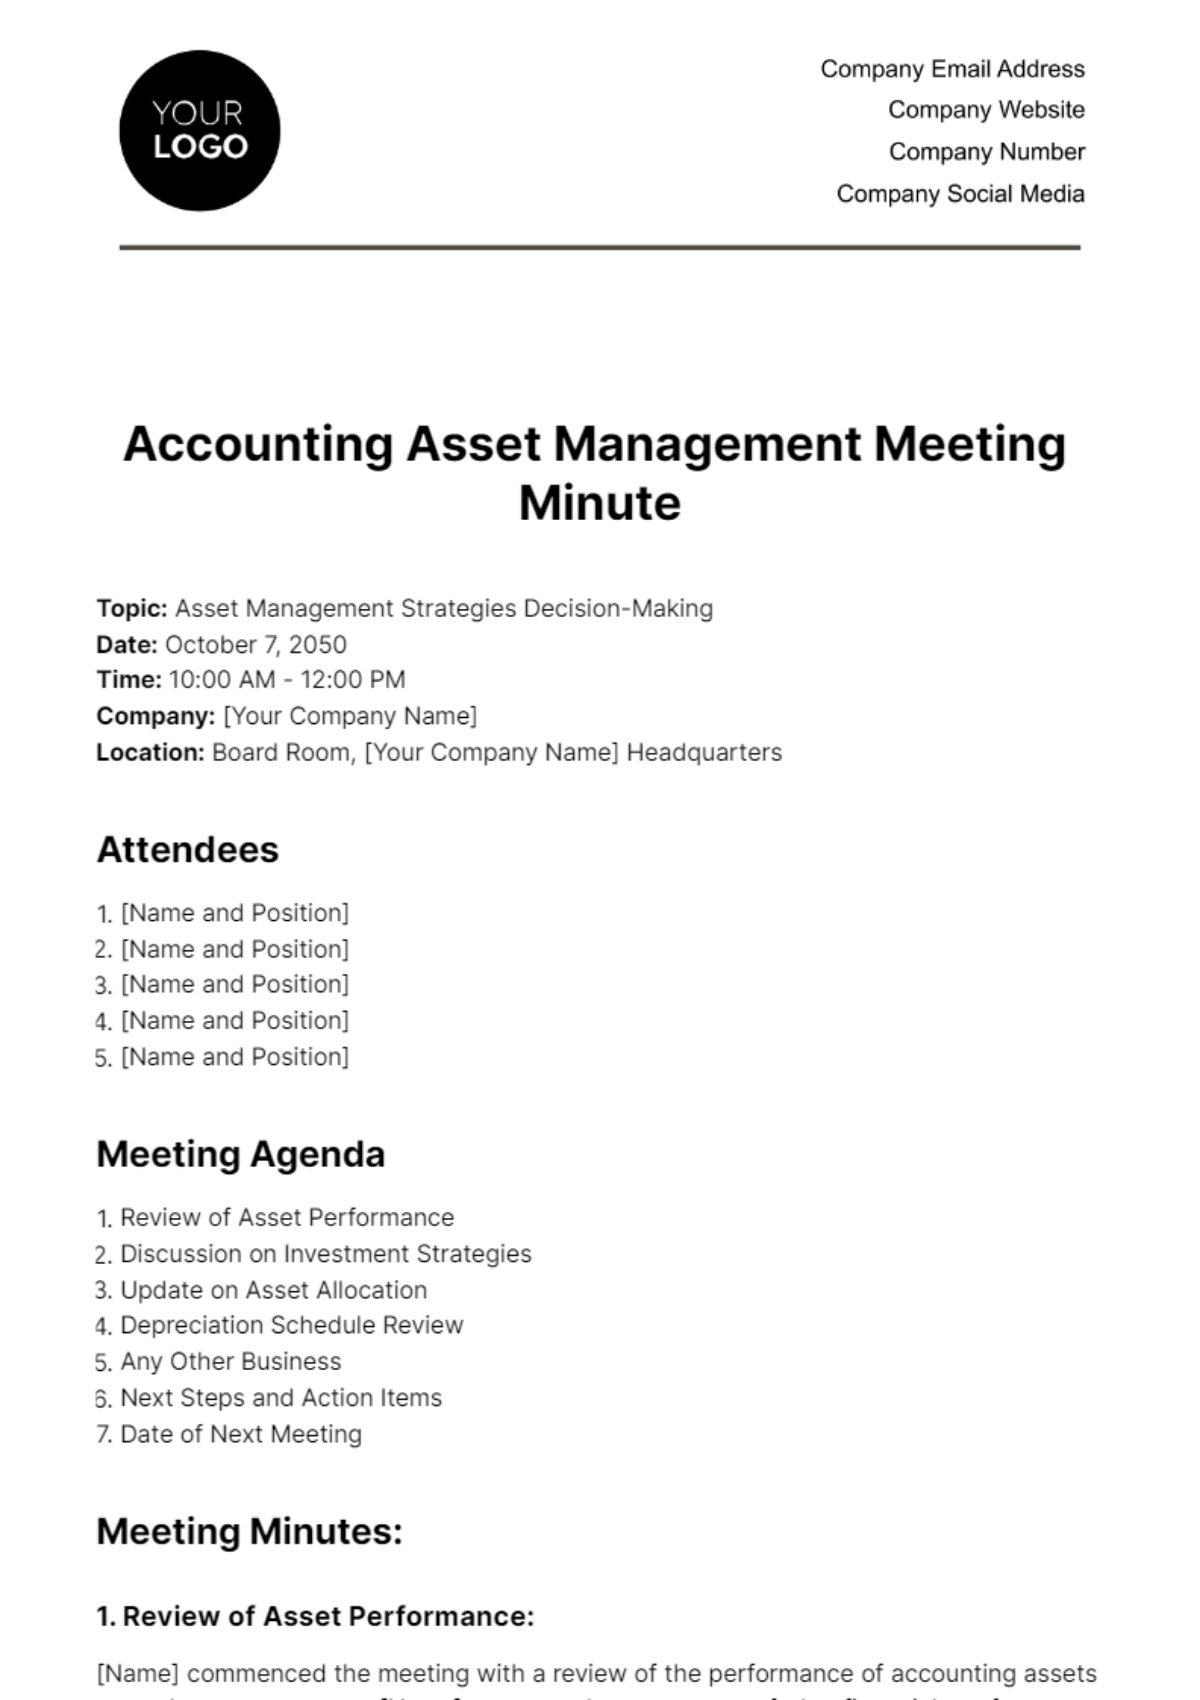 Accounting Asset Management Meeting Minute Template